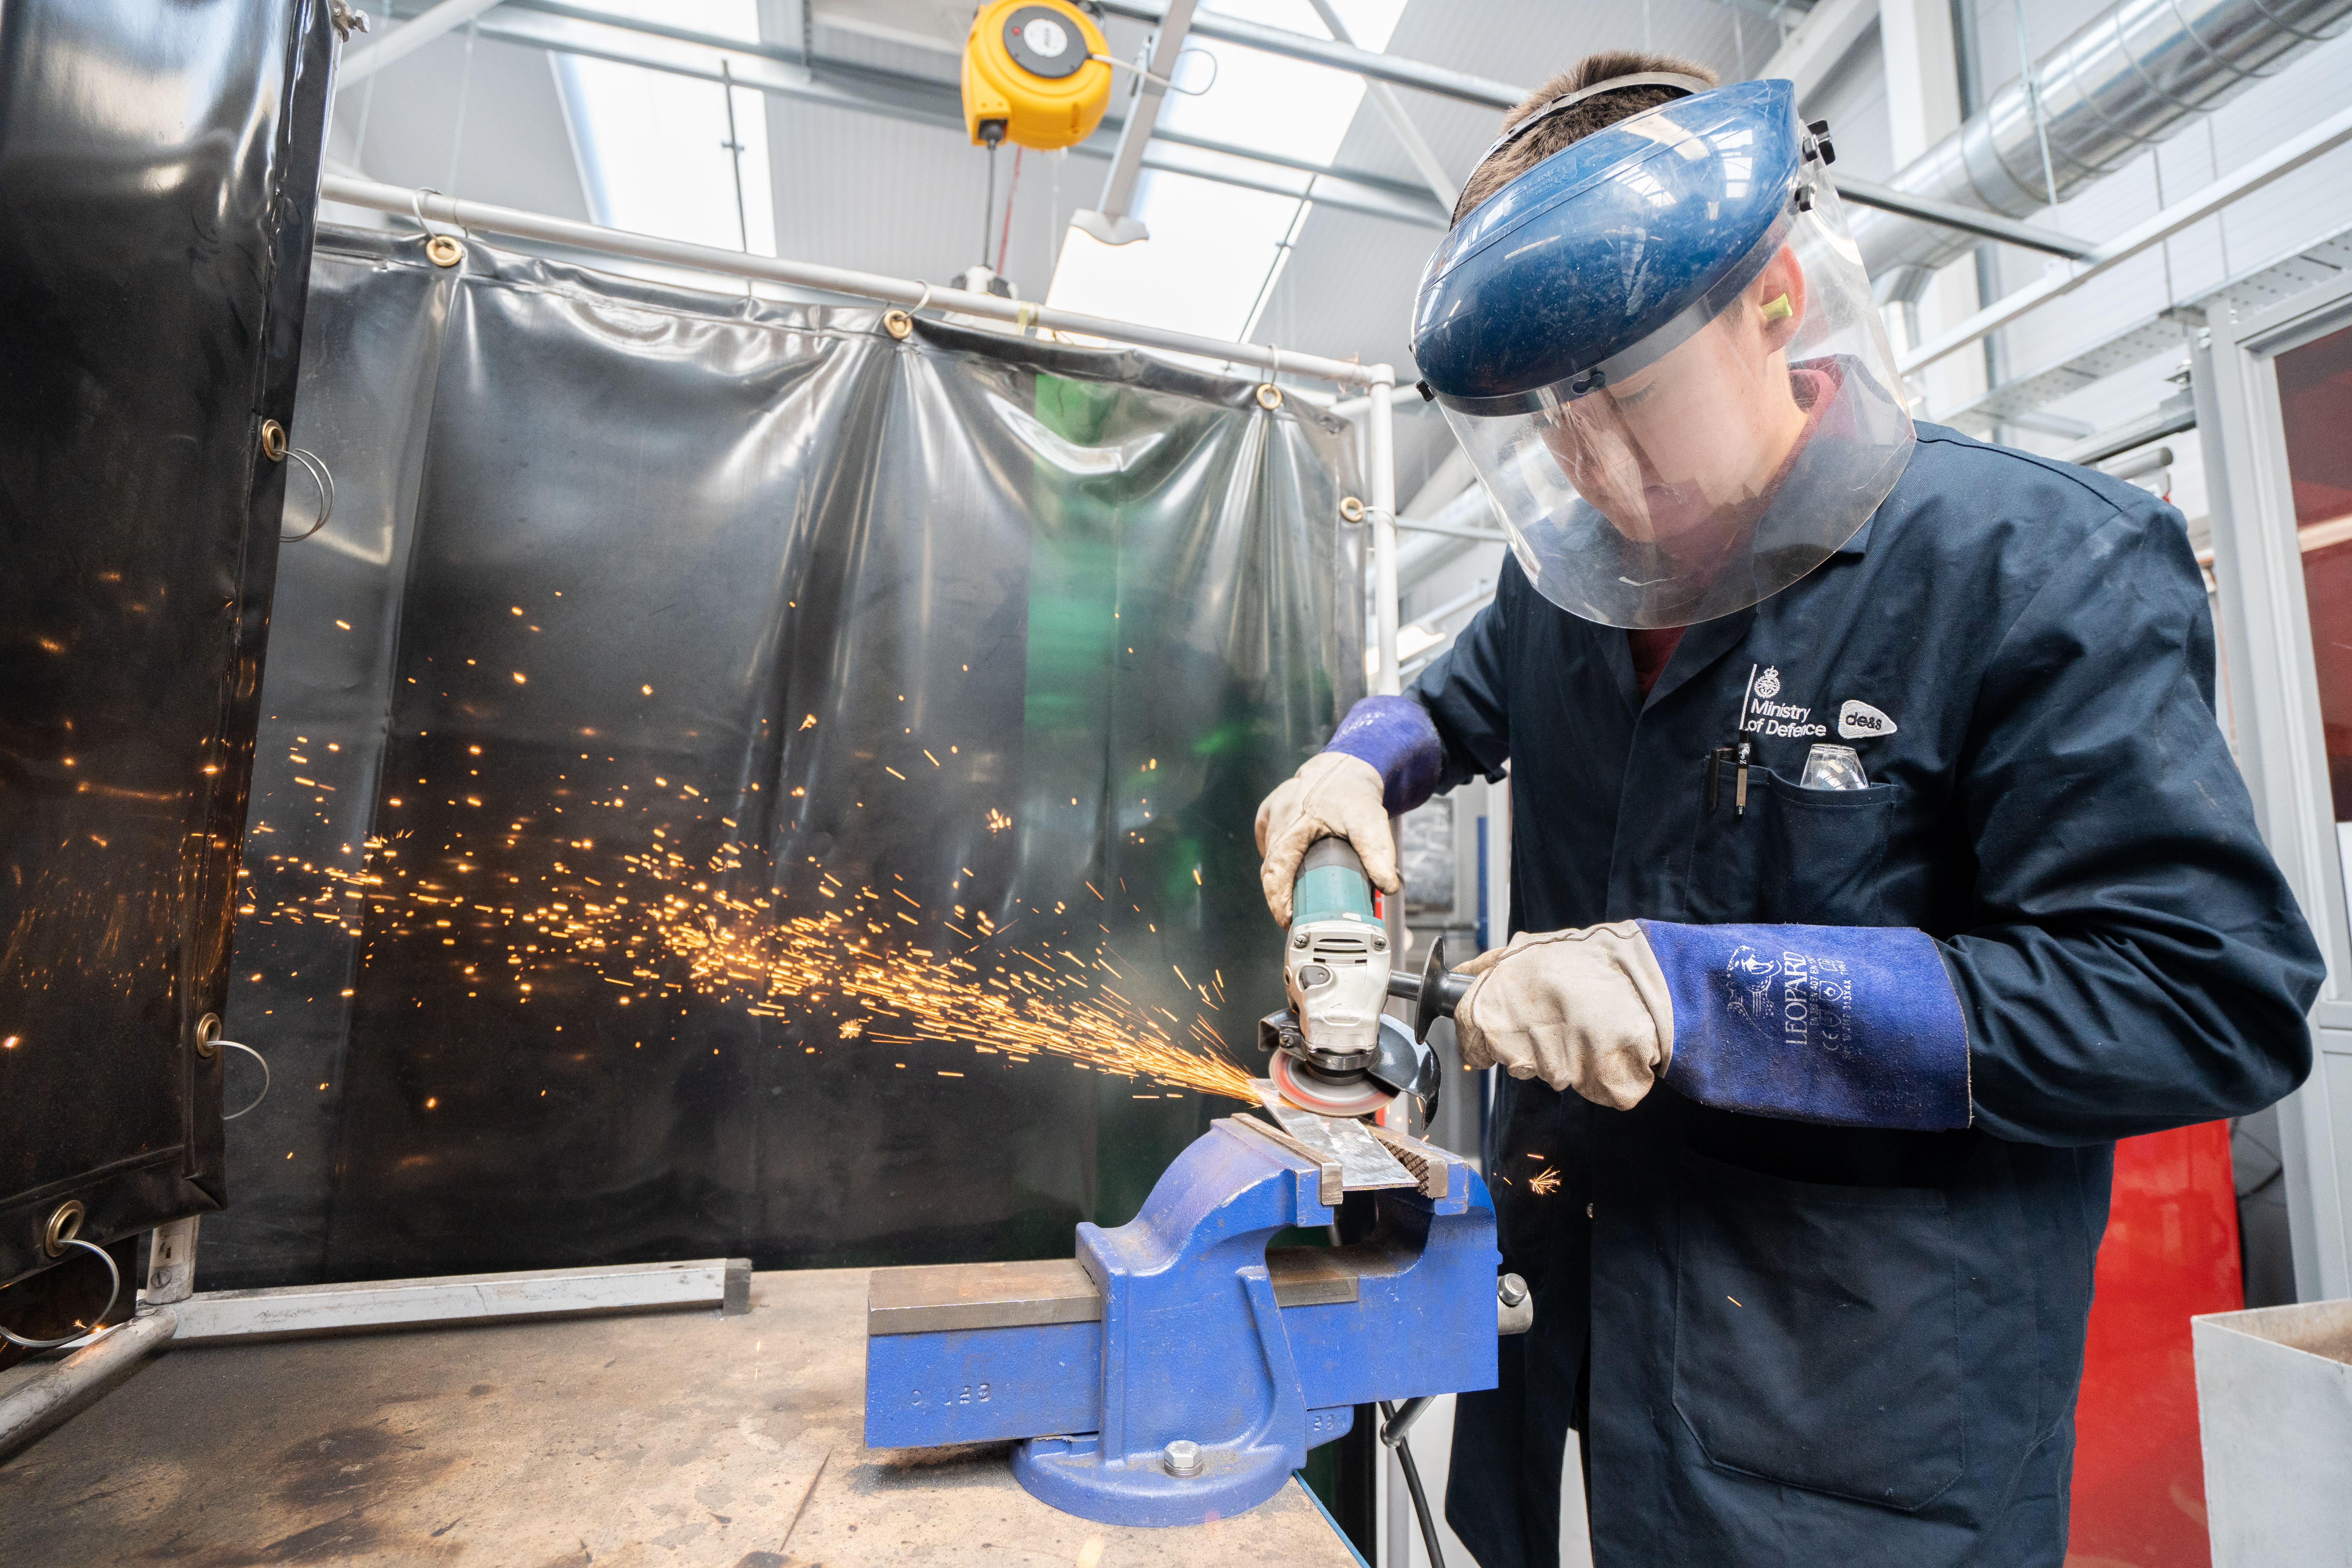 student wearing gloves and face mask using an angle grinder, sparks flying